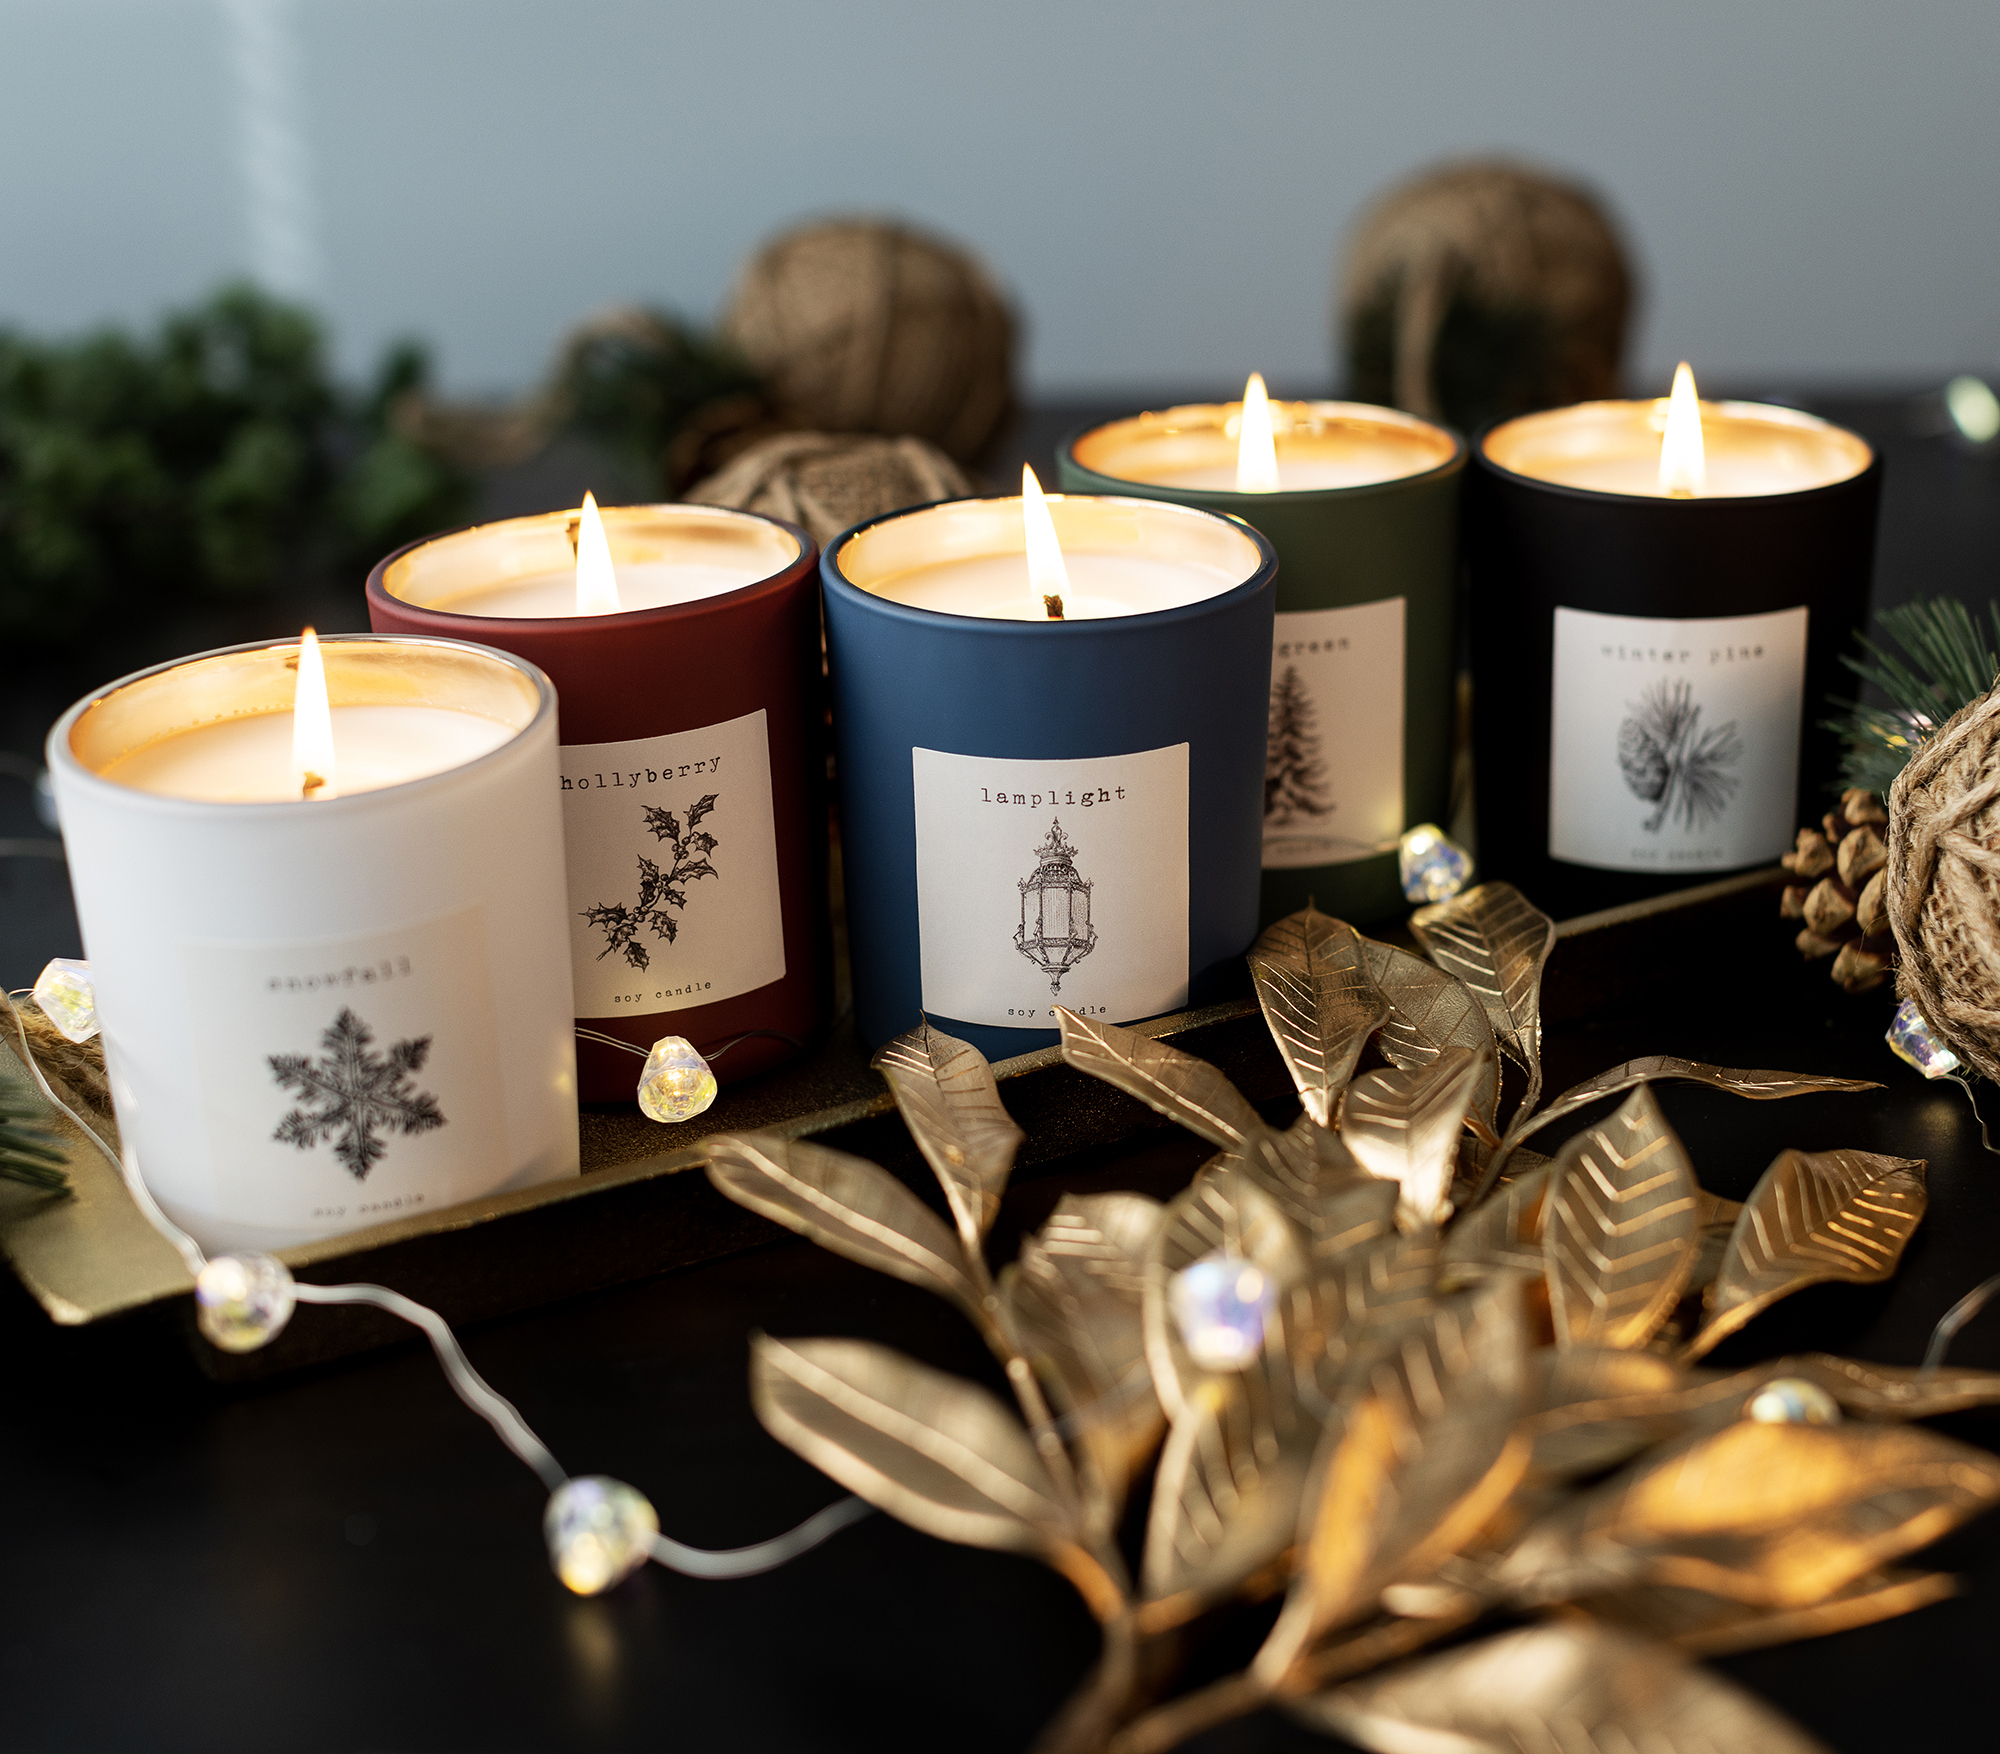 Matte tumbler jar candles lit with holiday inspired labels.